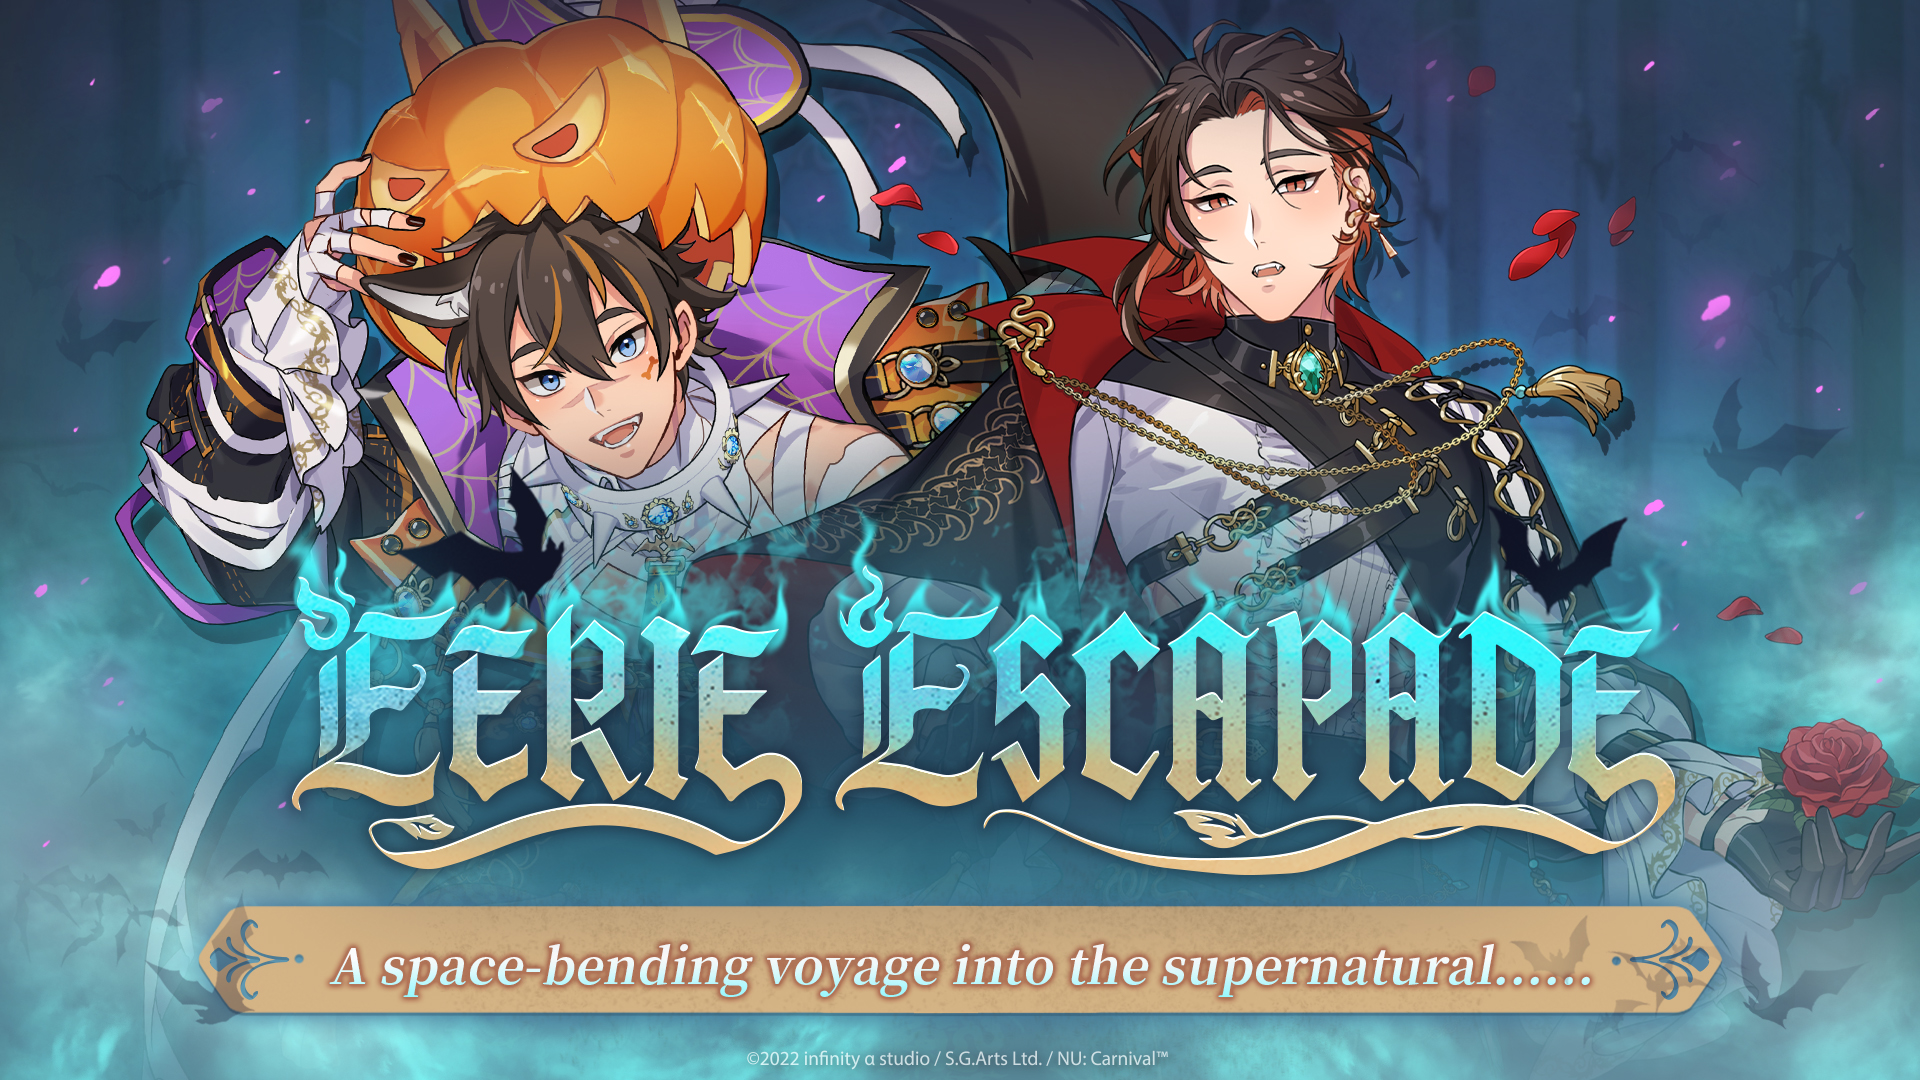 Newest Event Eerie Escapade is Officially Open!